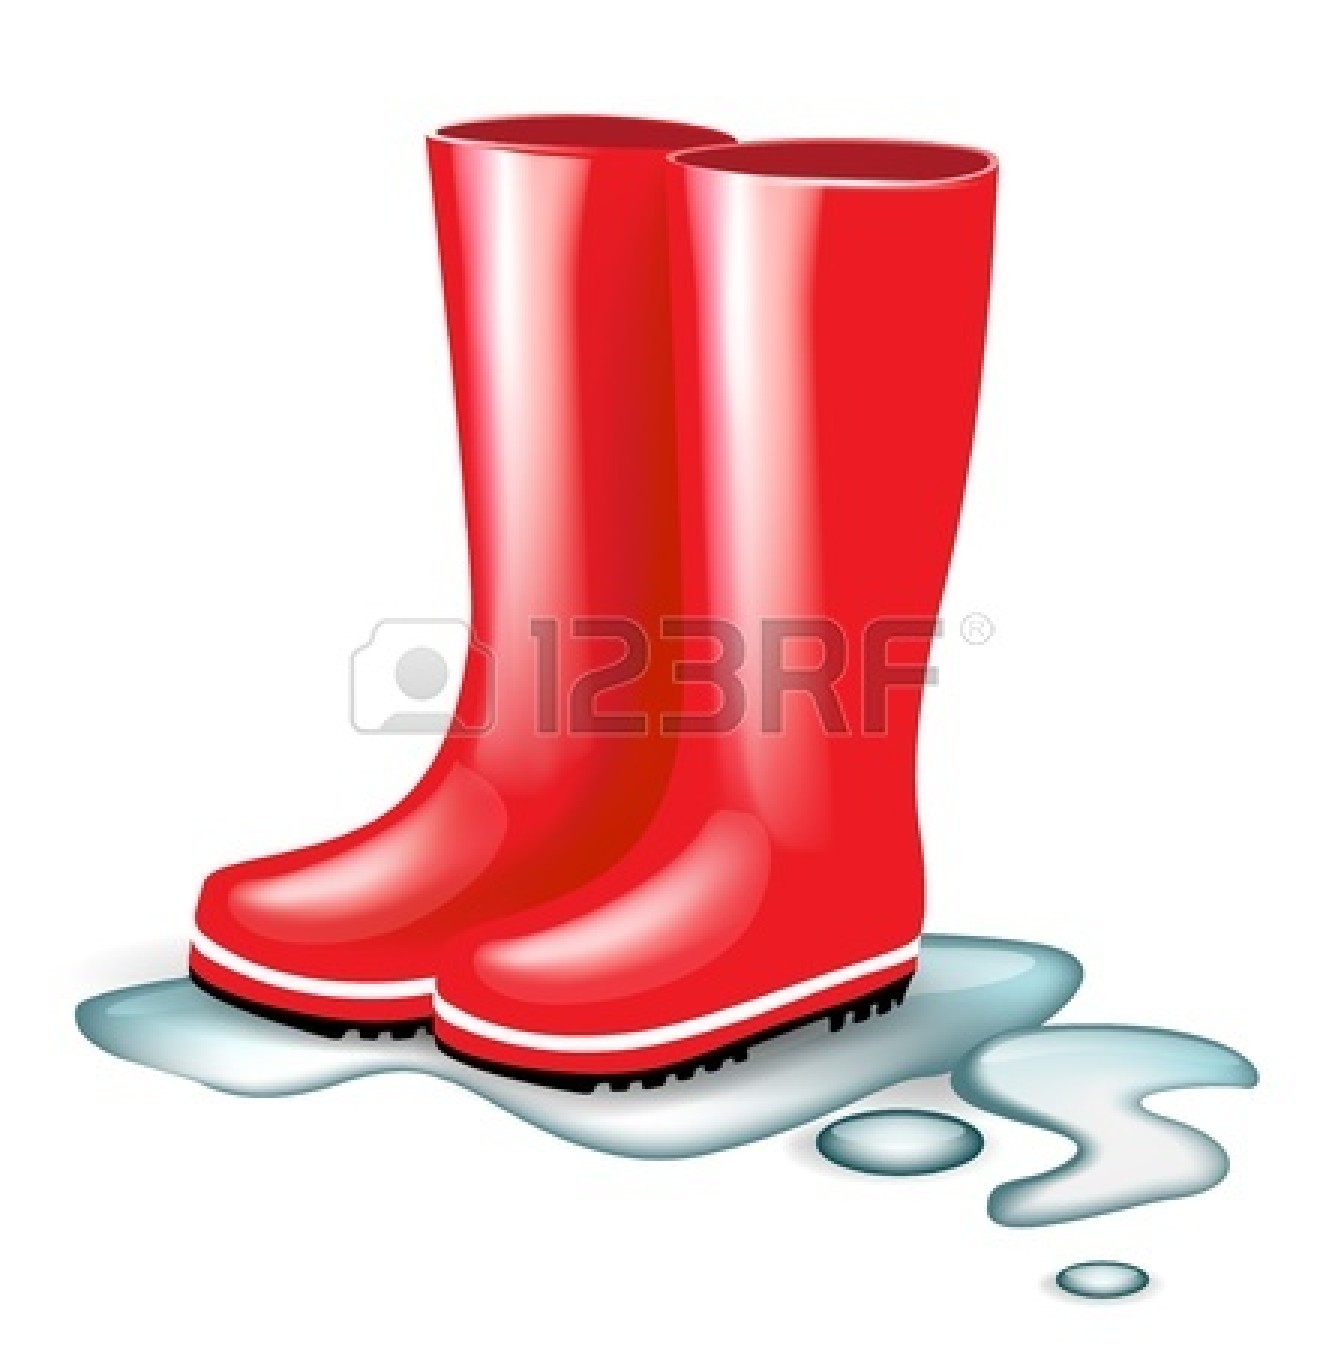 Red Rain Boots Clipart 14554947 Red Rubber Boots In Splash Of Water